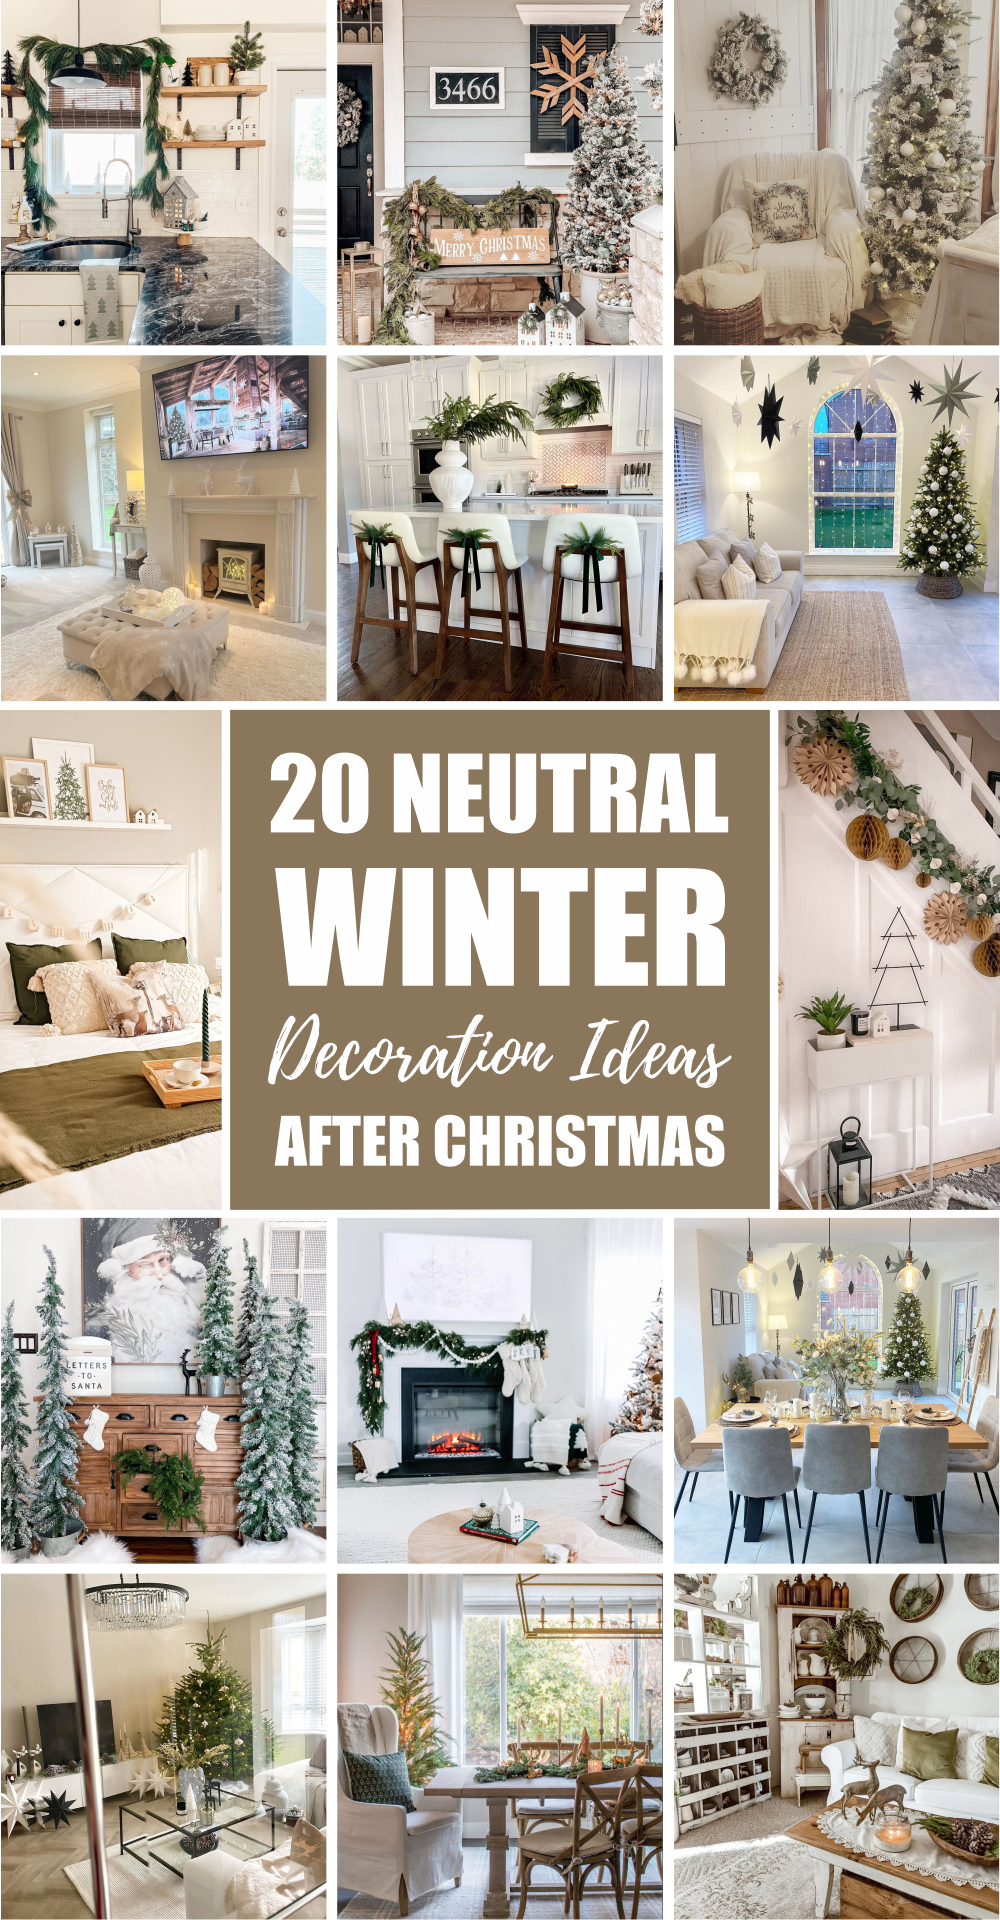 20 Neutral Winter Decoration Ideas After Christmas